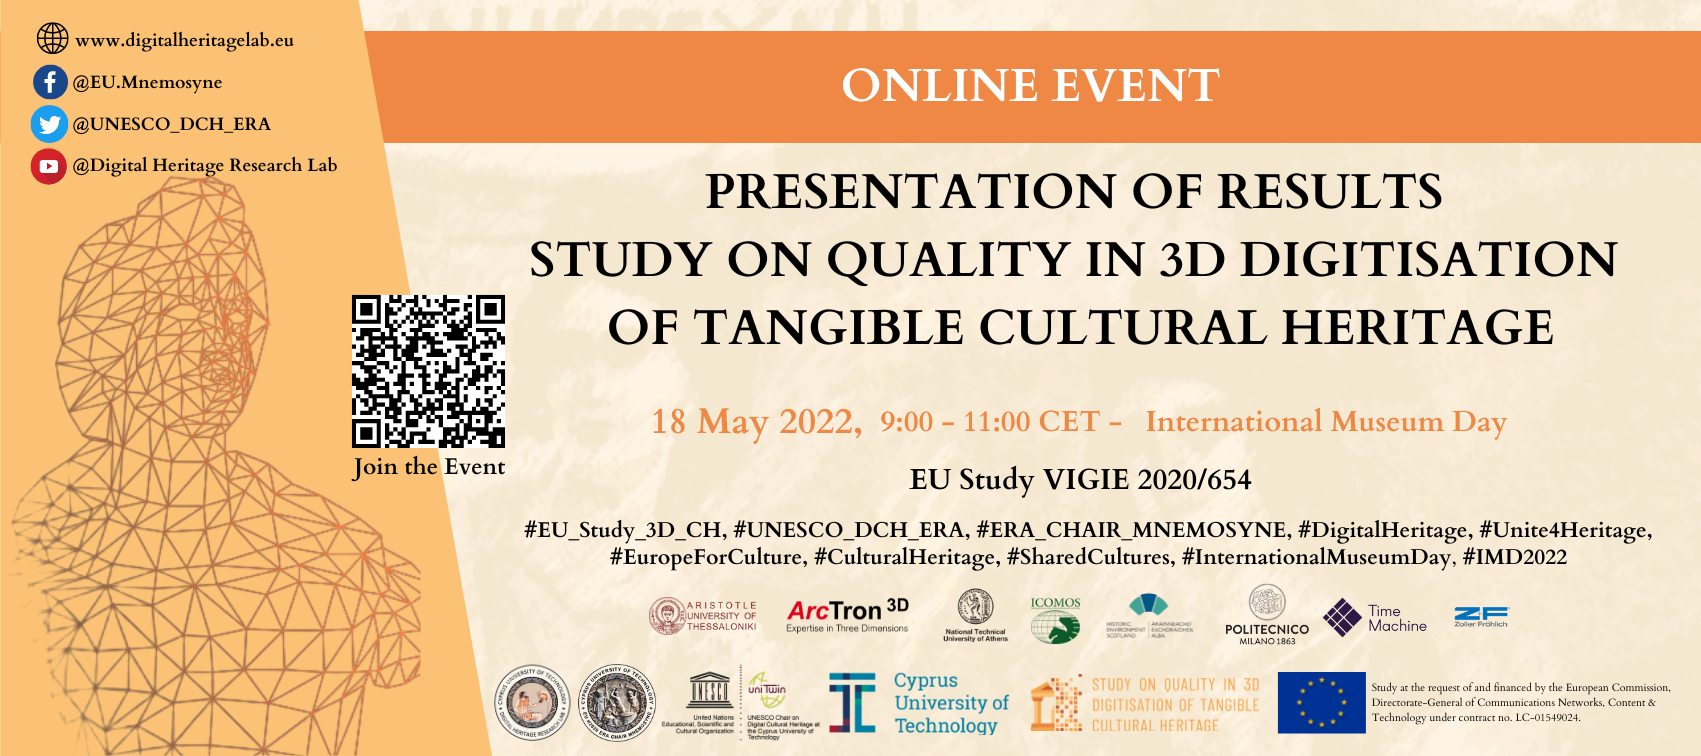 Presentation of EU VIGIE2020/654 results: Study on Quality in 3D Digitisation of Tangible Cultural Heritage